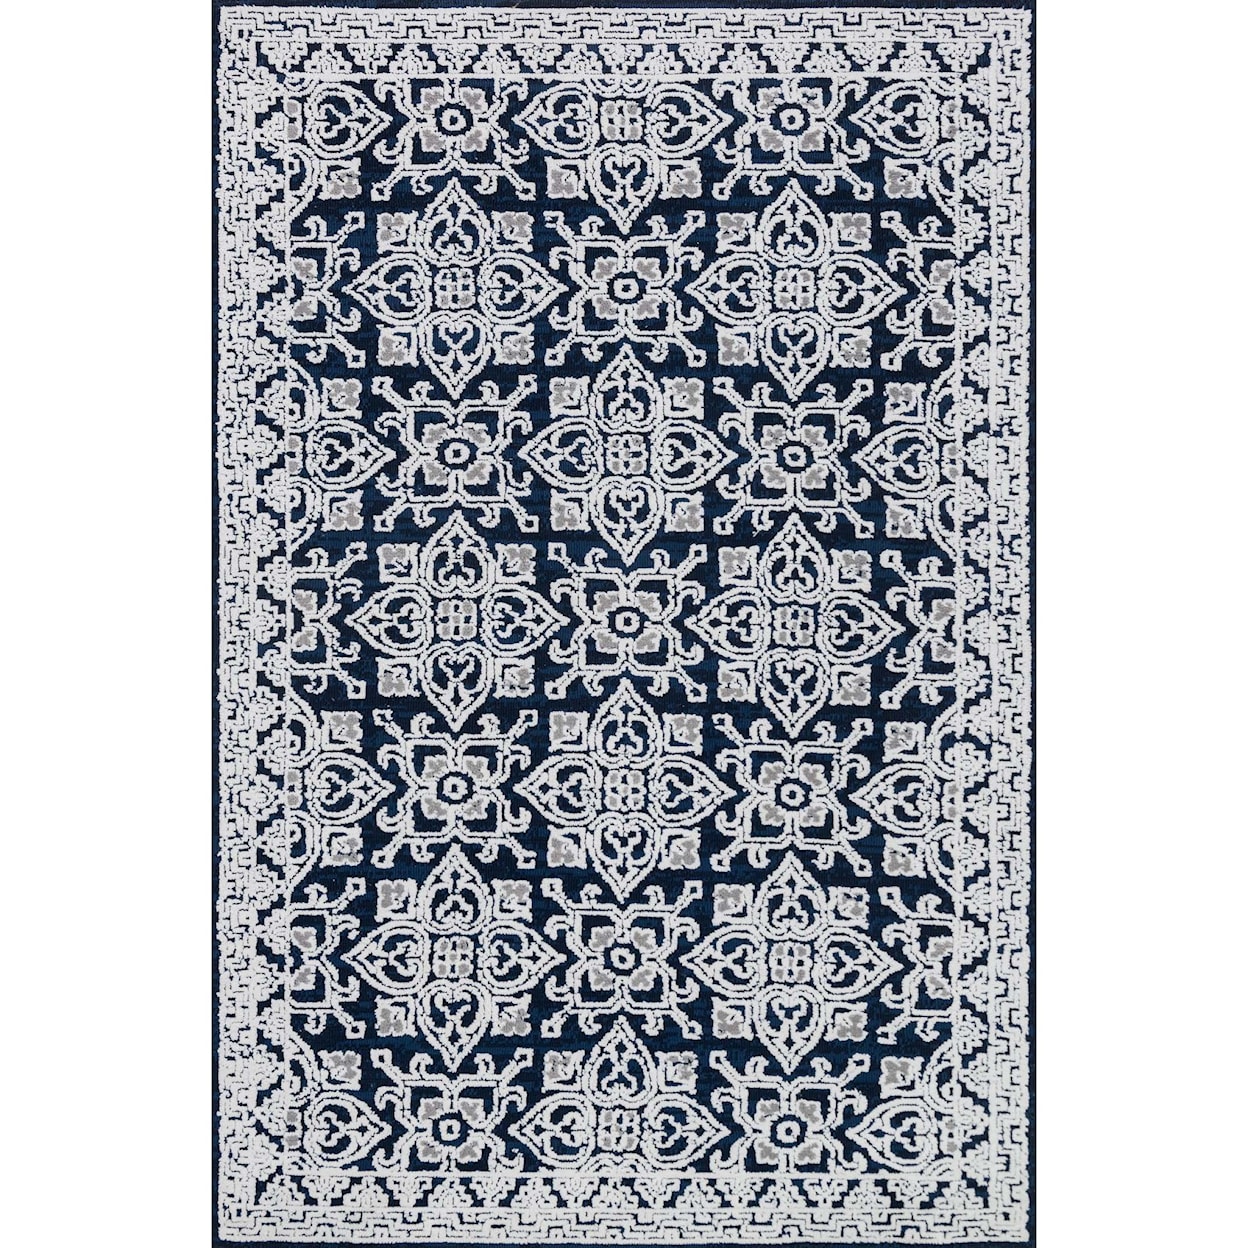 Magnolia Home by Joanna Gaines for Loloi Lotus 2' 3" x 3' 9" Rectangle Rug